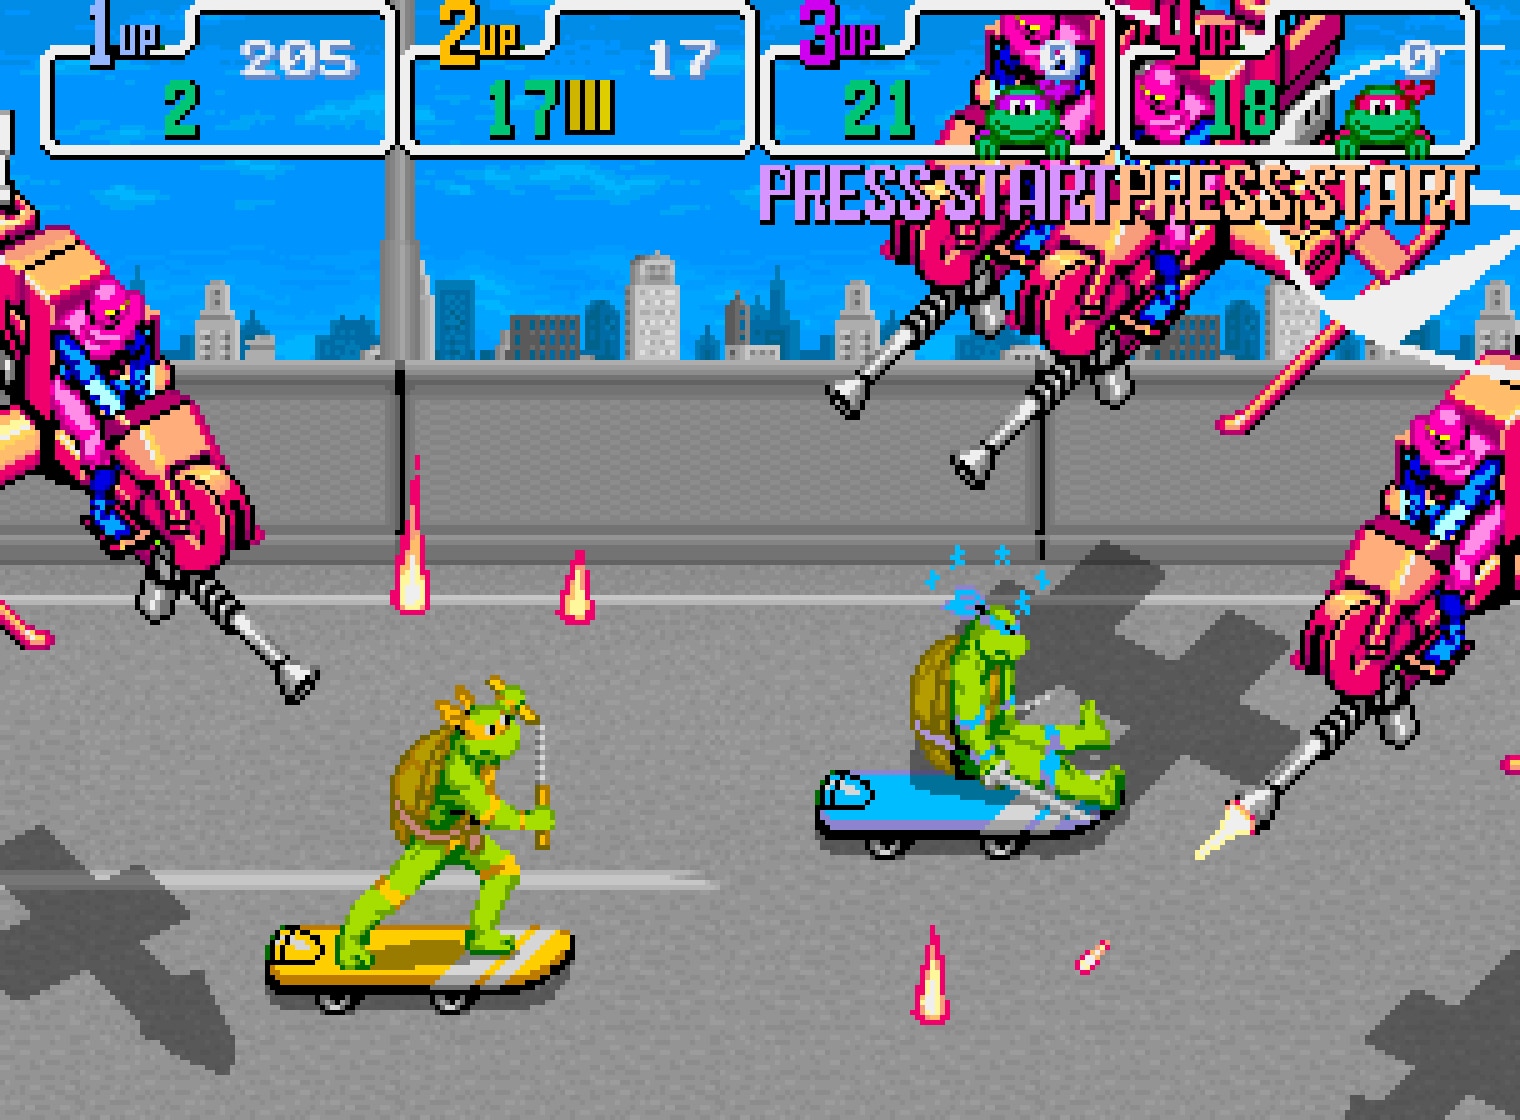 Konami Teenage Mutant Ninja Turtles arcade game 1989 is not good but it is important and necessary for The Cowabunga Collection from Digital Eclipse